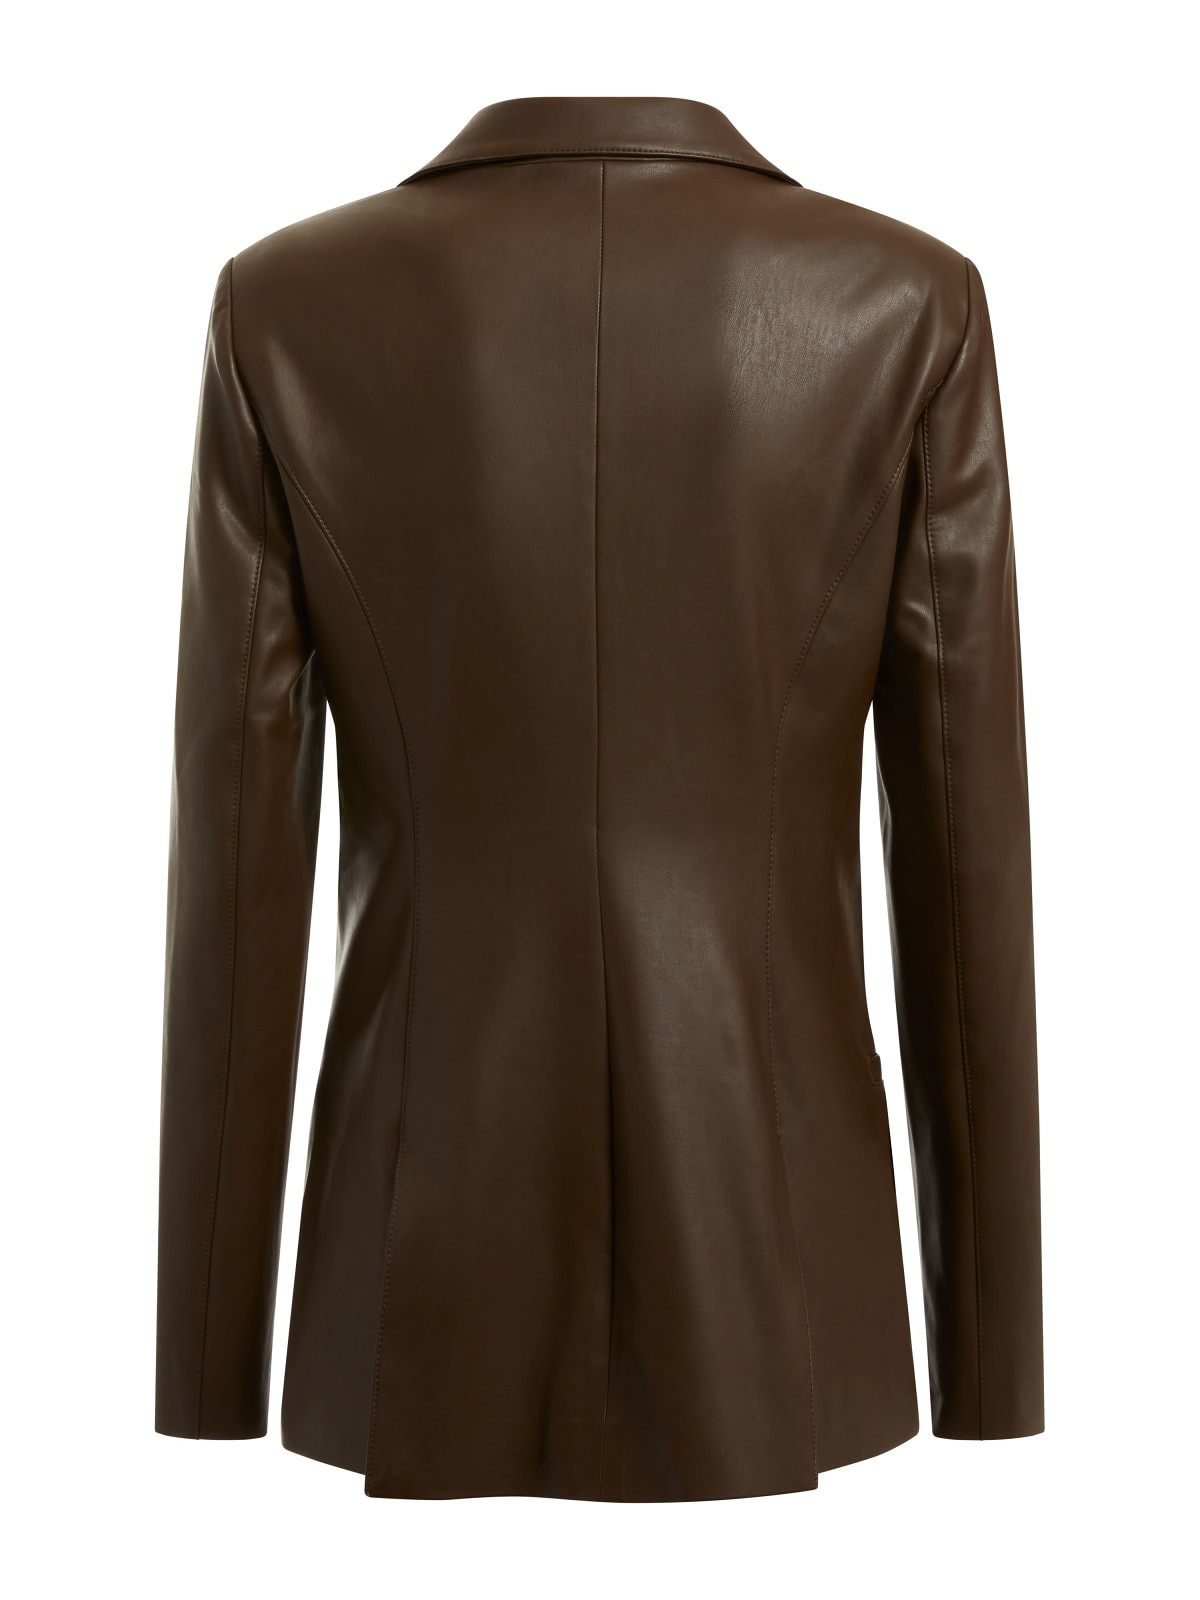 Faux leather blazer, Brown, large image number 1